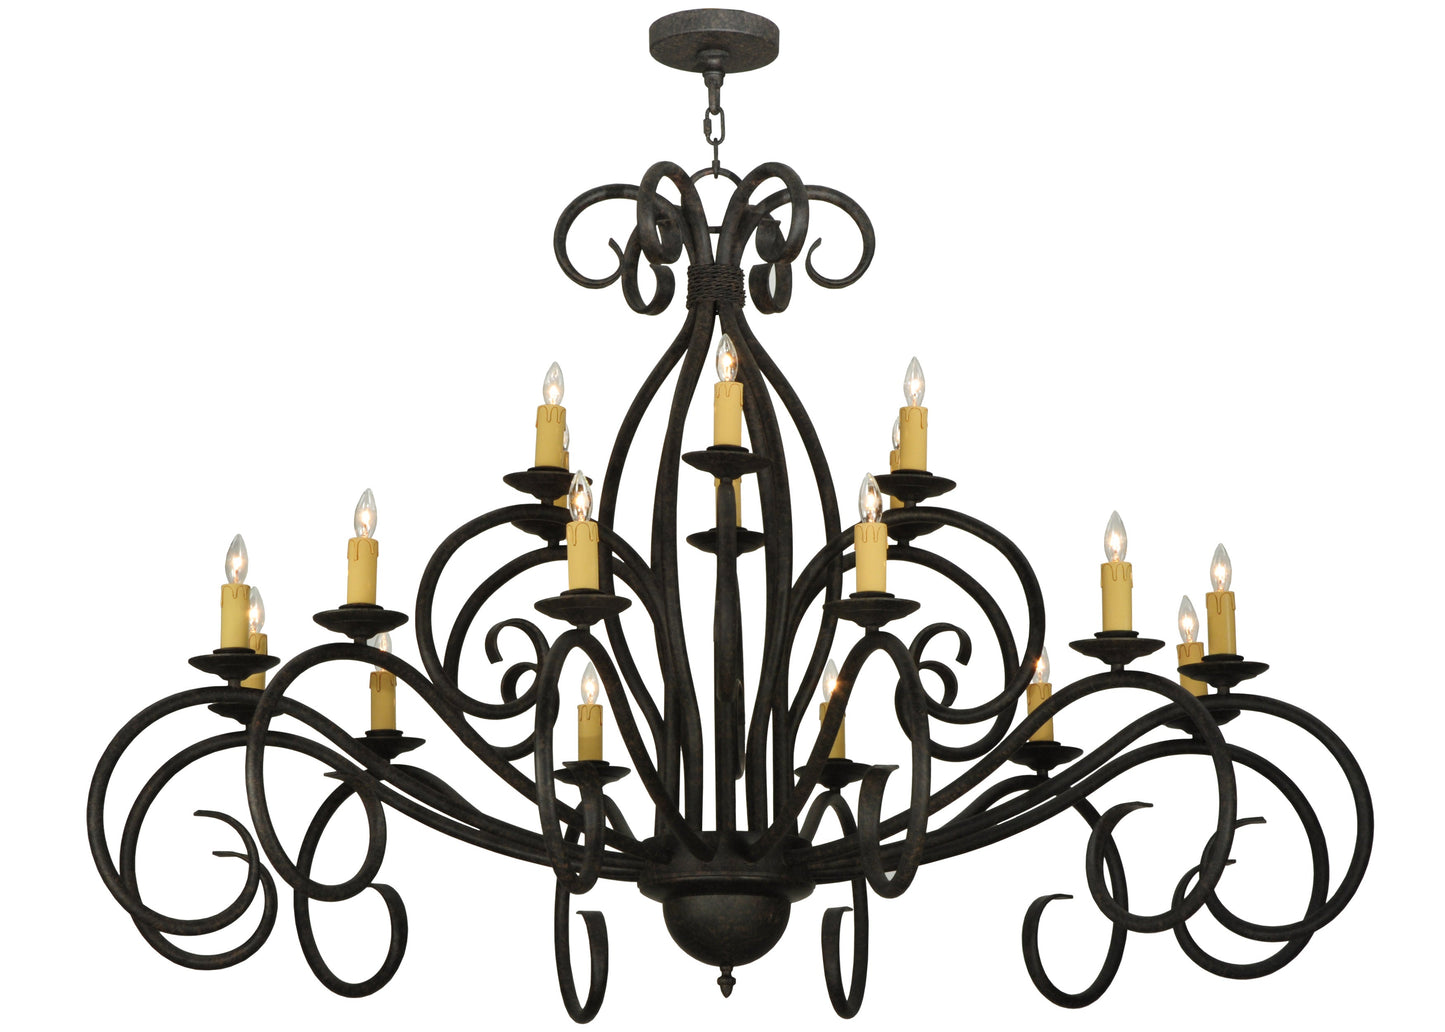 60" Sienna 18-Light Two Tier Chandelier by 2nd Ave Lighting